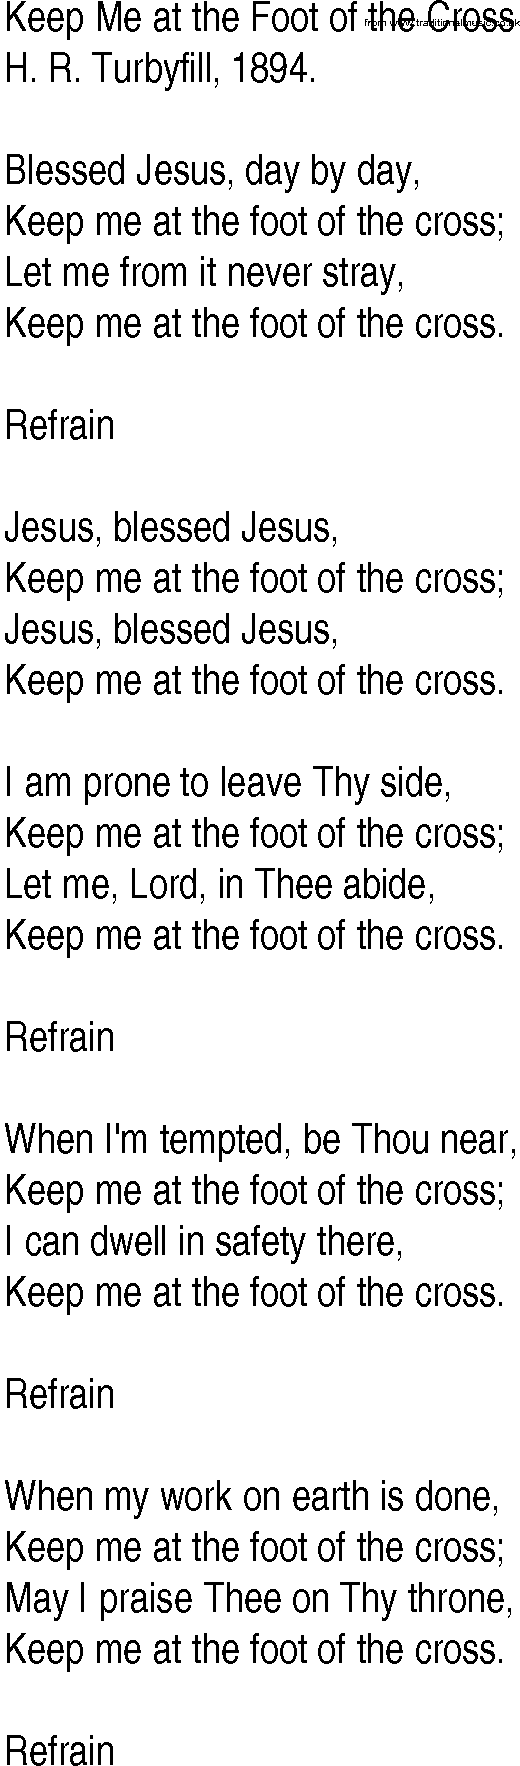 Hymn and Gospel Song: Keep Me at the Foot of the Cross by H R Turbyfill lyrics